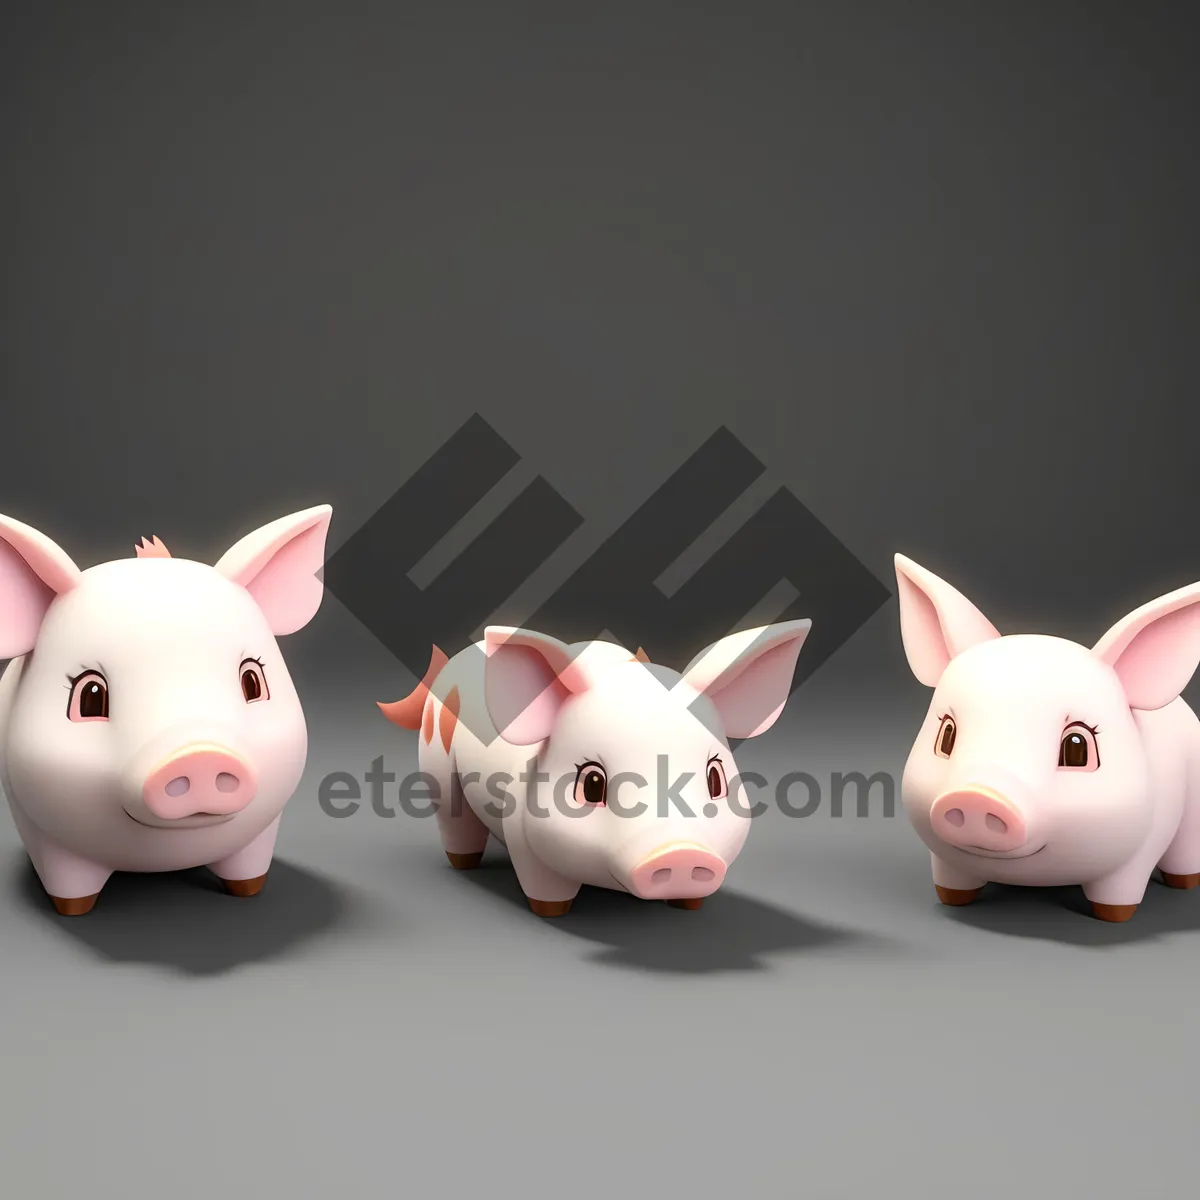 Picture of Pink Piggy Bank: Saving Money for Financial Wealth